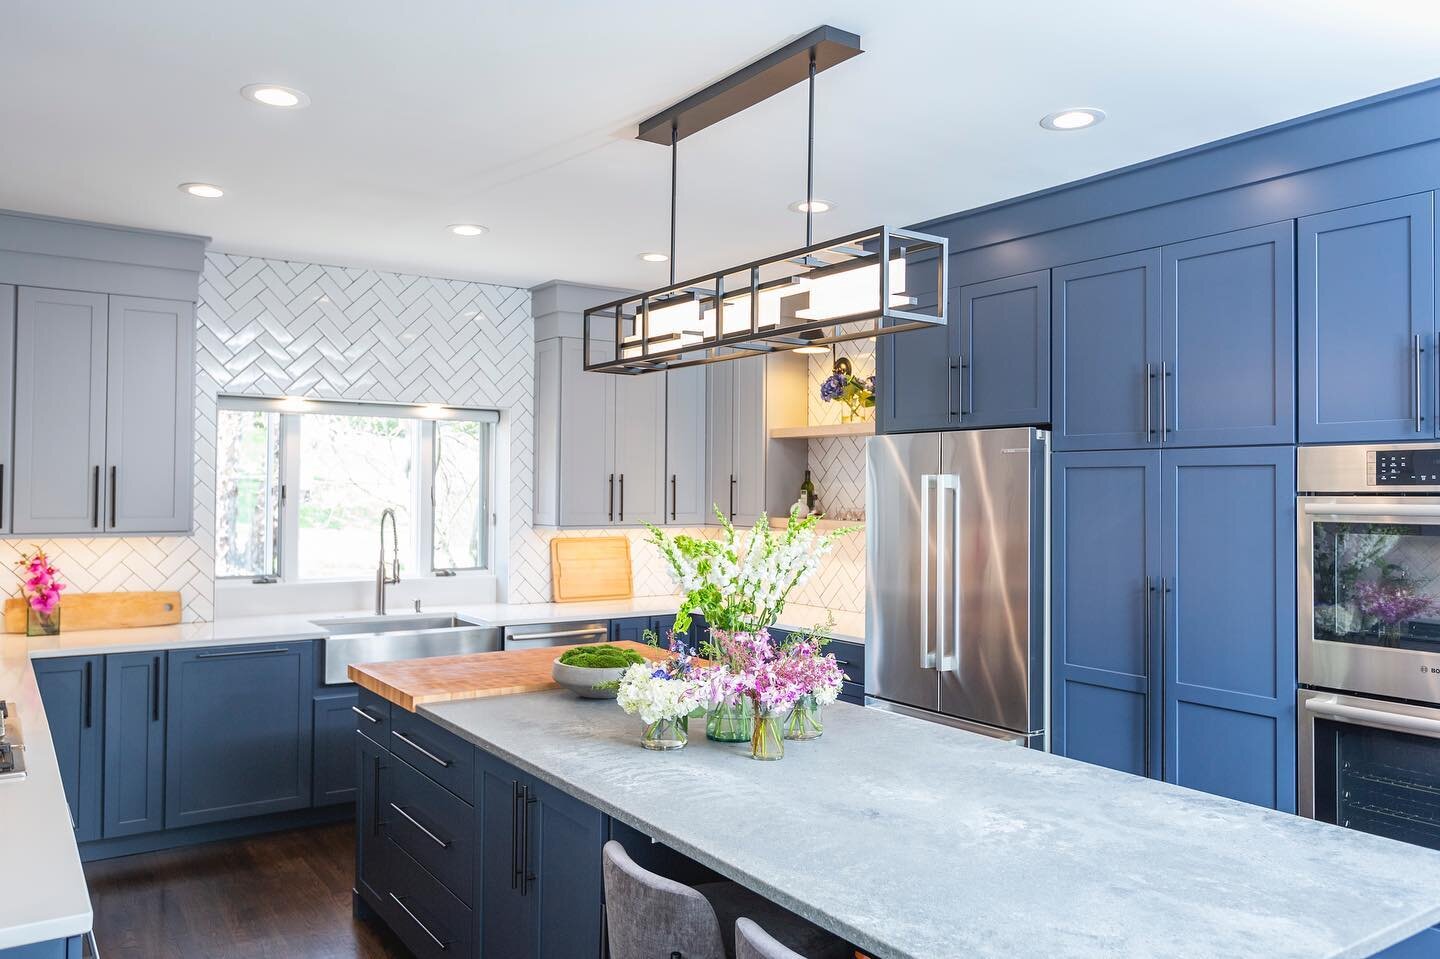 We love an active kitchen! Our clients are always prepping &amp; cooking. 👩&zwj;🍳🧑&zwj;🍳We integrated ease and convenience into the island design with the custom maple butcher block. The natural color pops against the concrete quartz &amp; blue c